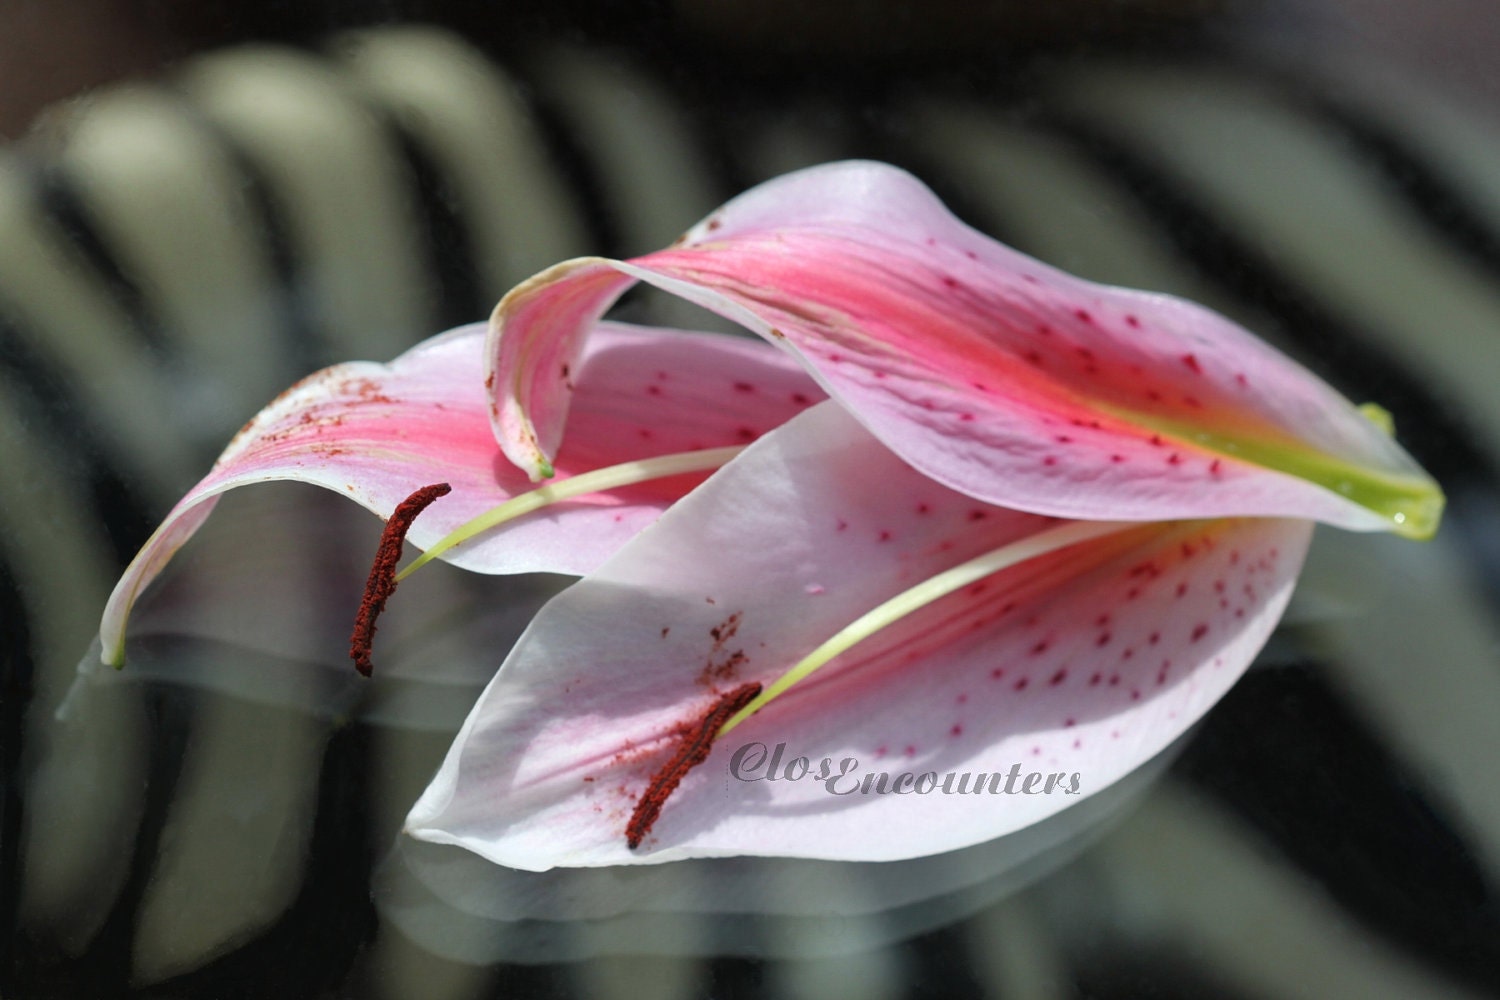 Oriental Lily Petals 2 - Fine Art Photography Print - Garden Photography Home Decor Wall Art for Home or Office